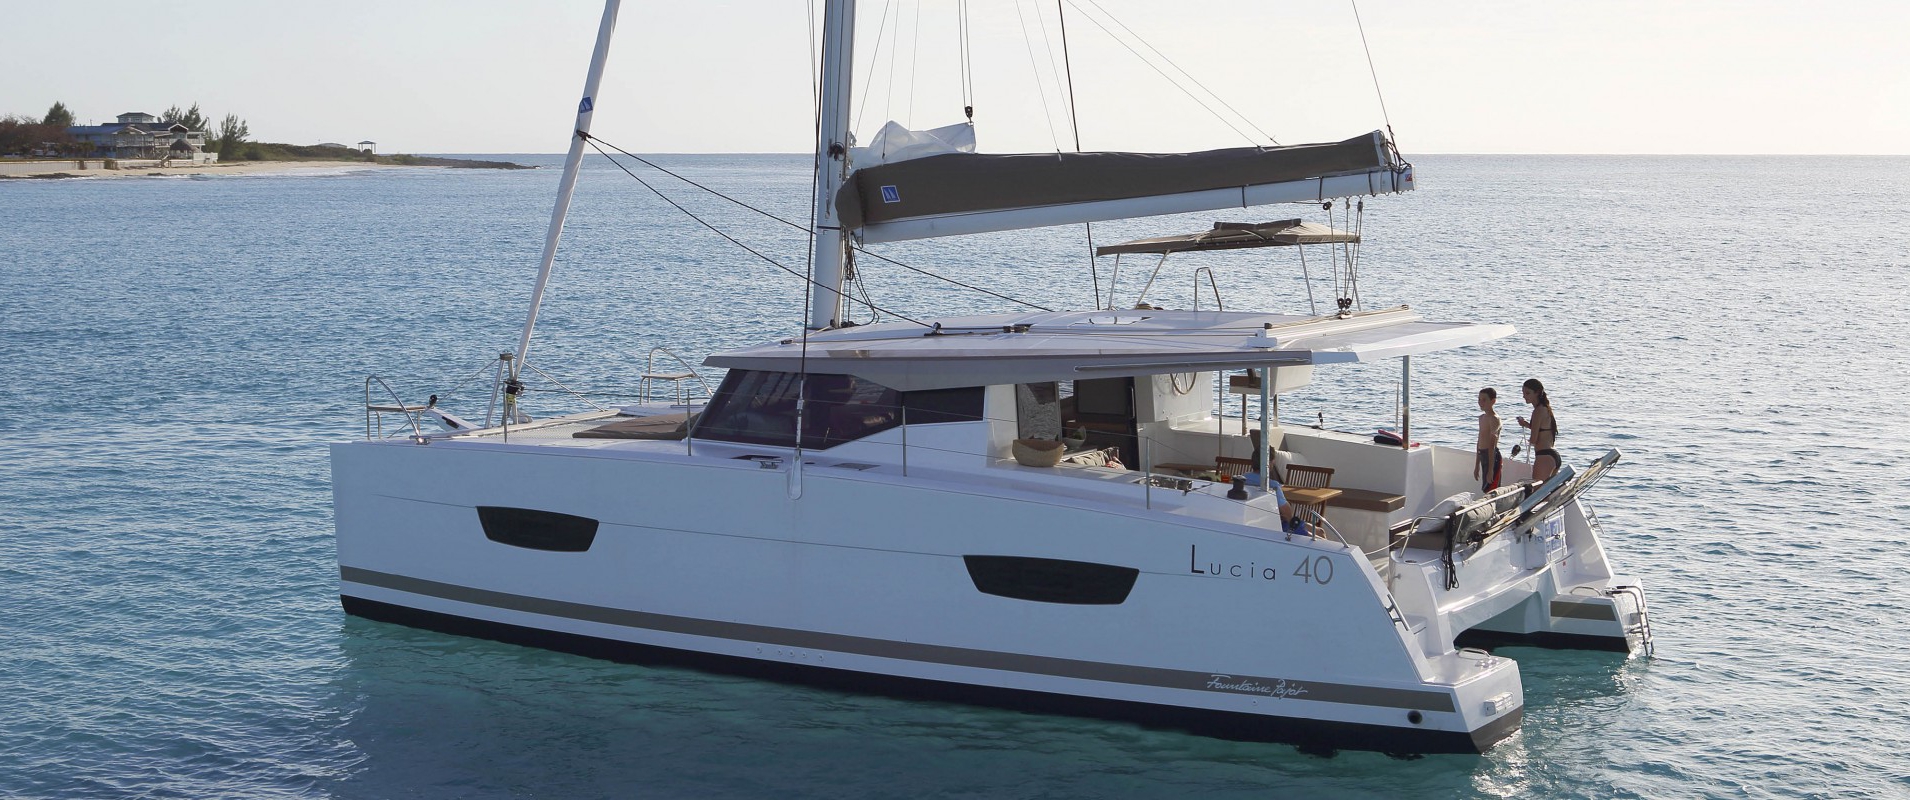 Fountaine Pajot Lucia 40 CLASS Bareboat Charter in Greece